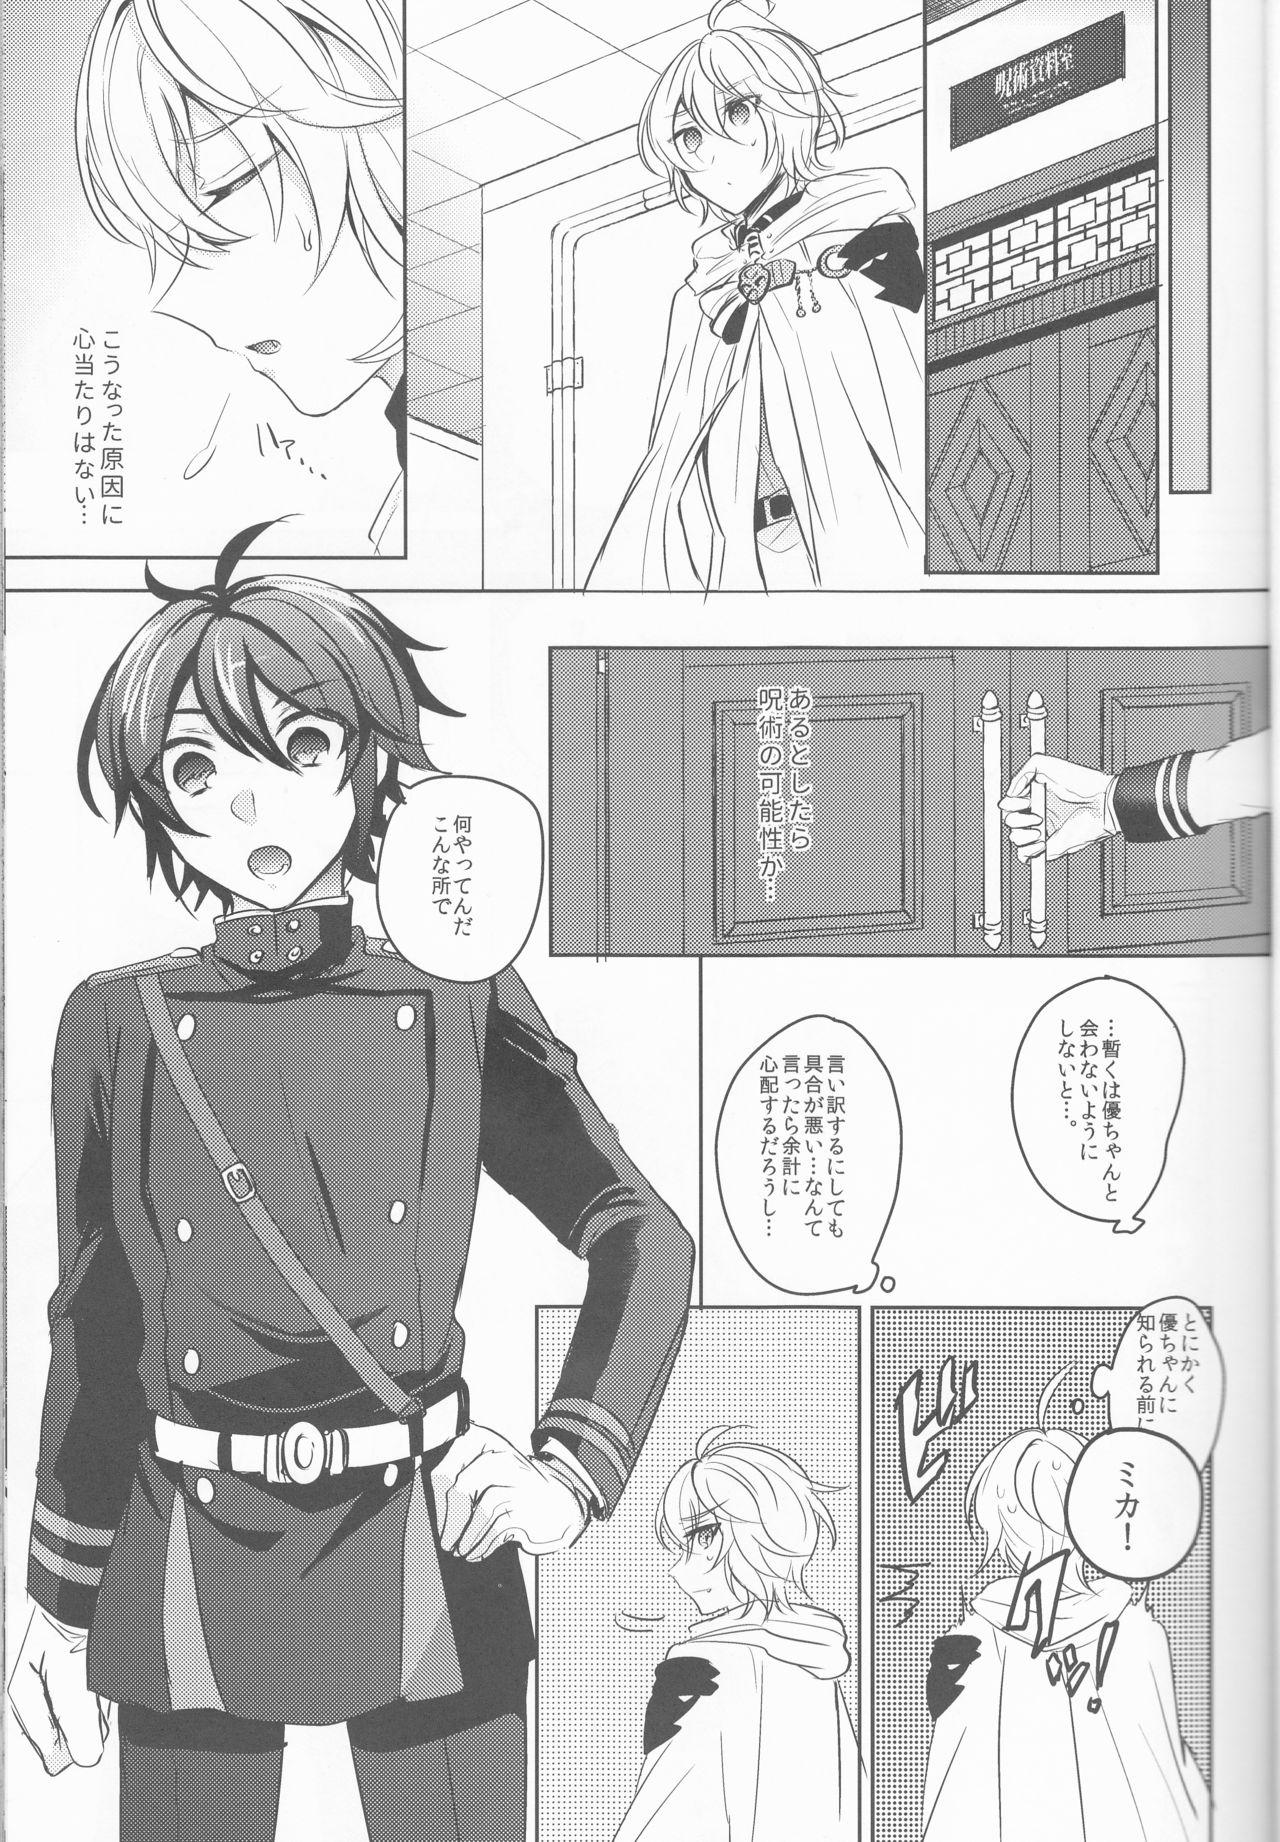 Zorra Lovers Dreamer - Seraph of the end Leaked - Page 4